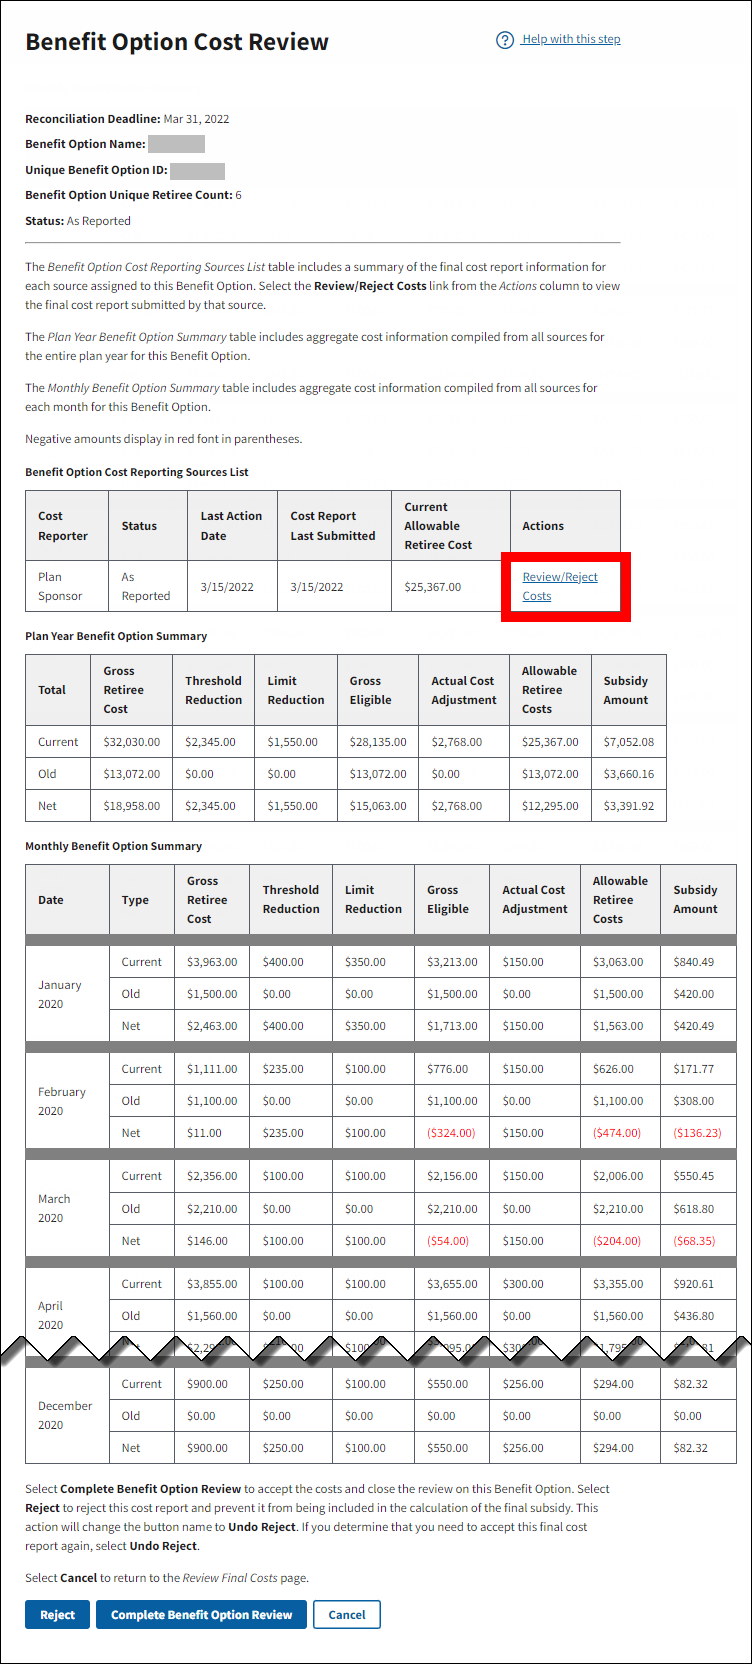 Benefit Option Cost Review page with sample data. Review/Reject Costs link is highlighted.